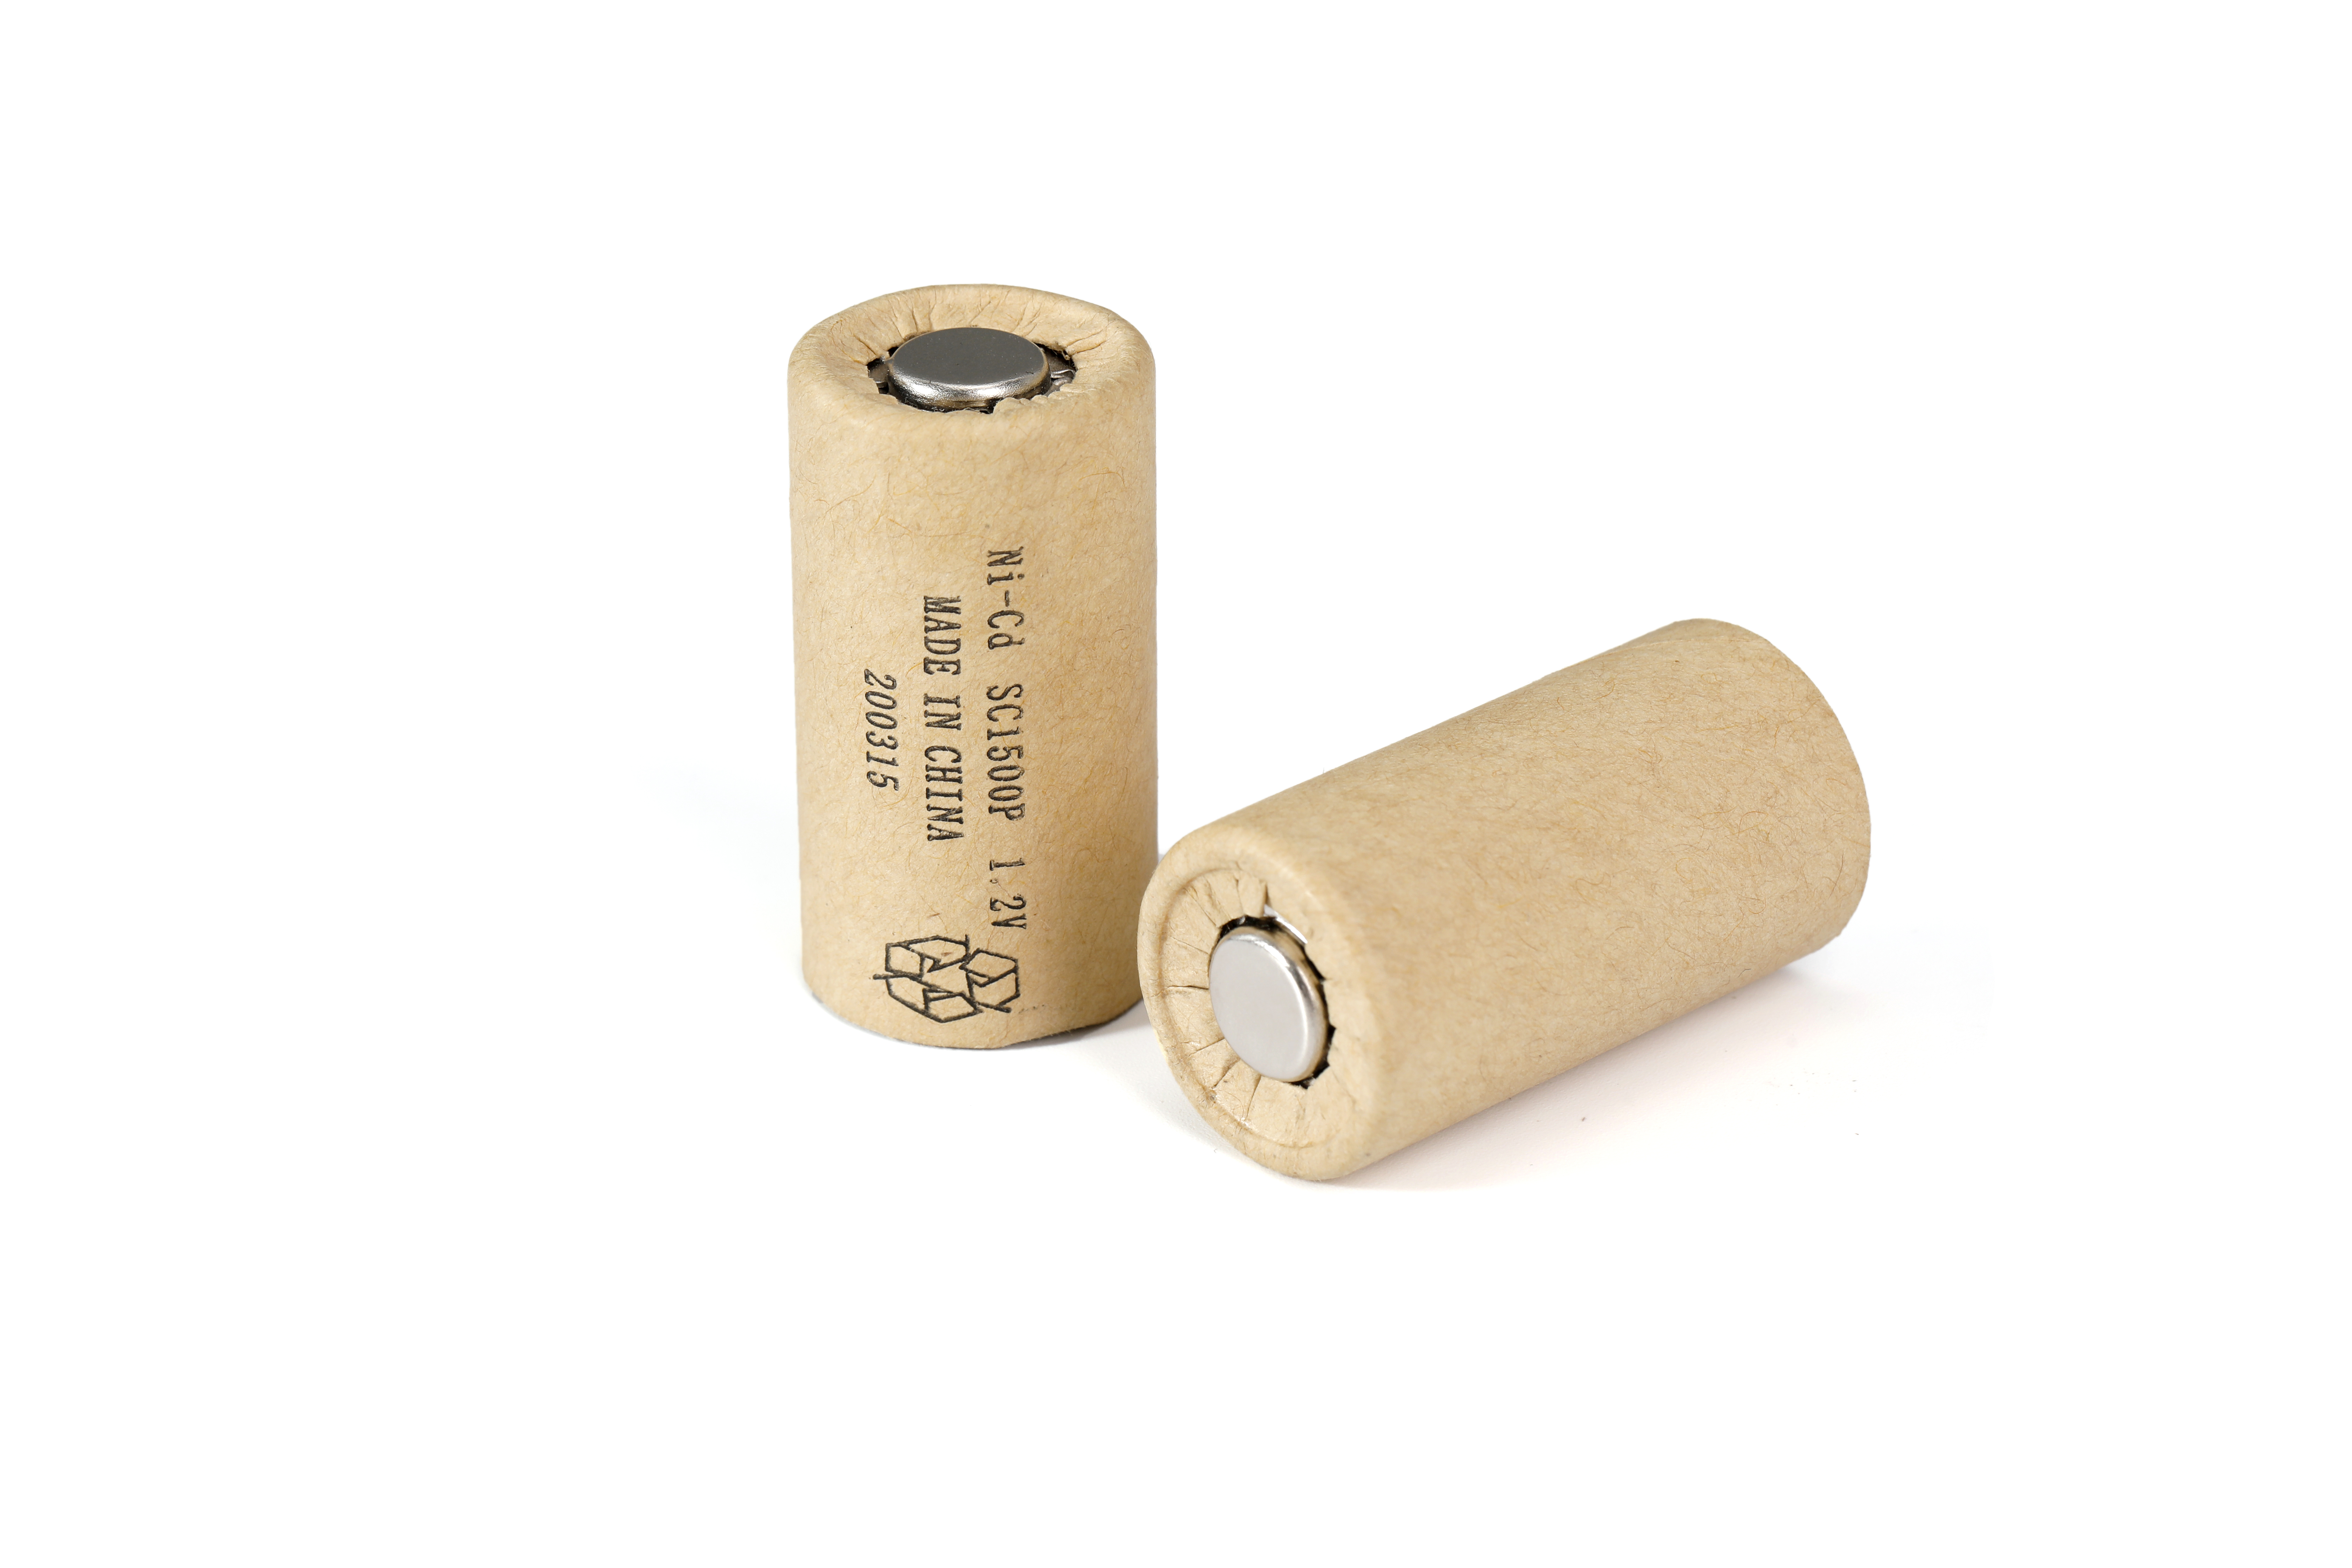 Rechargeable li-on battery with USB cable